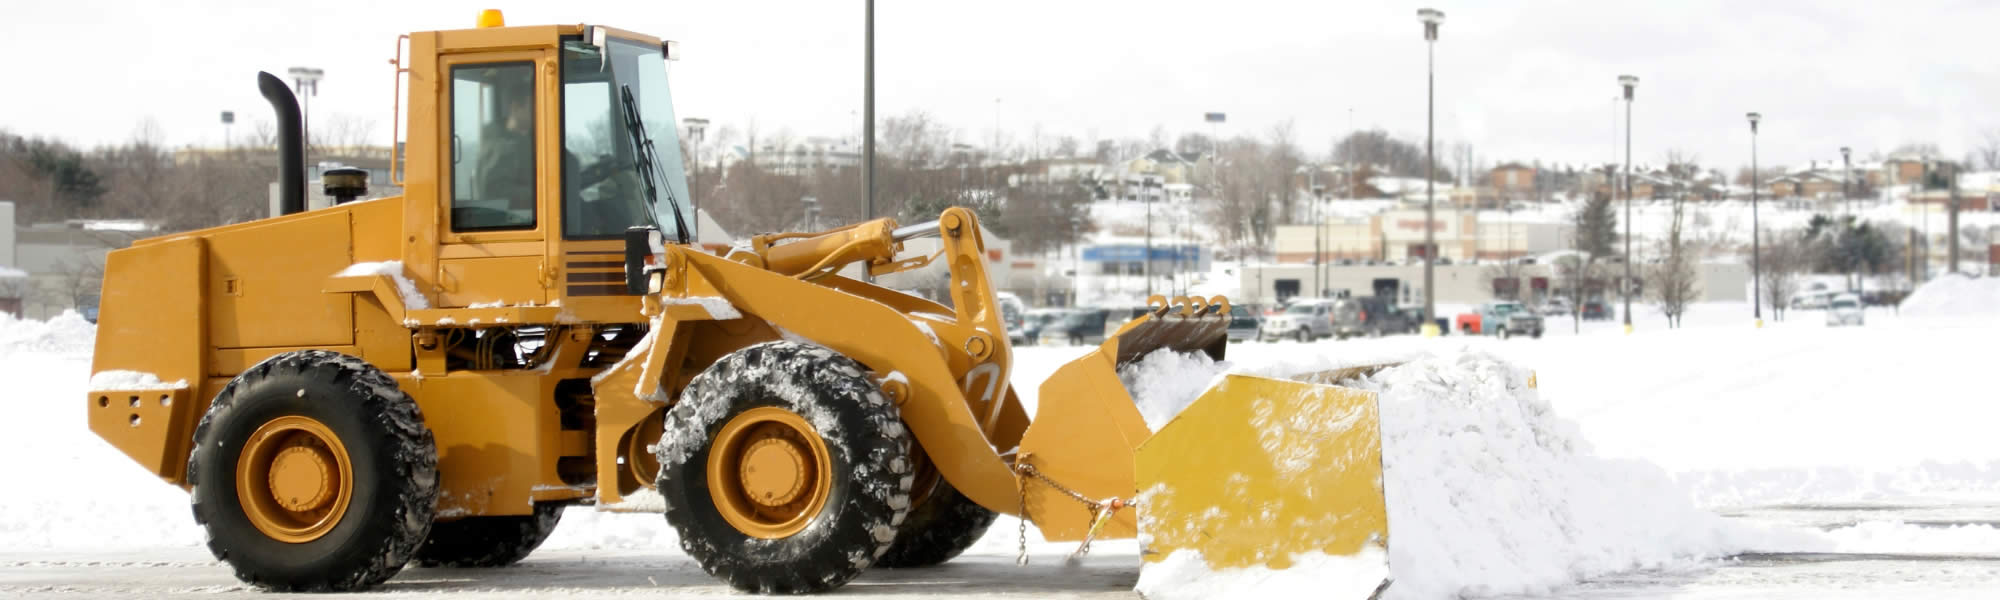 Hobart Snow and Ice Removal Services near me